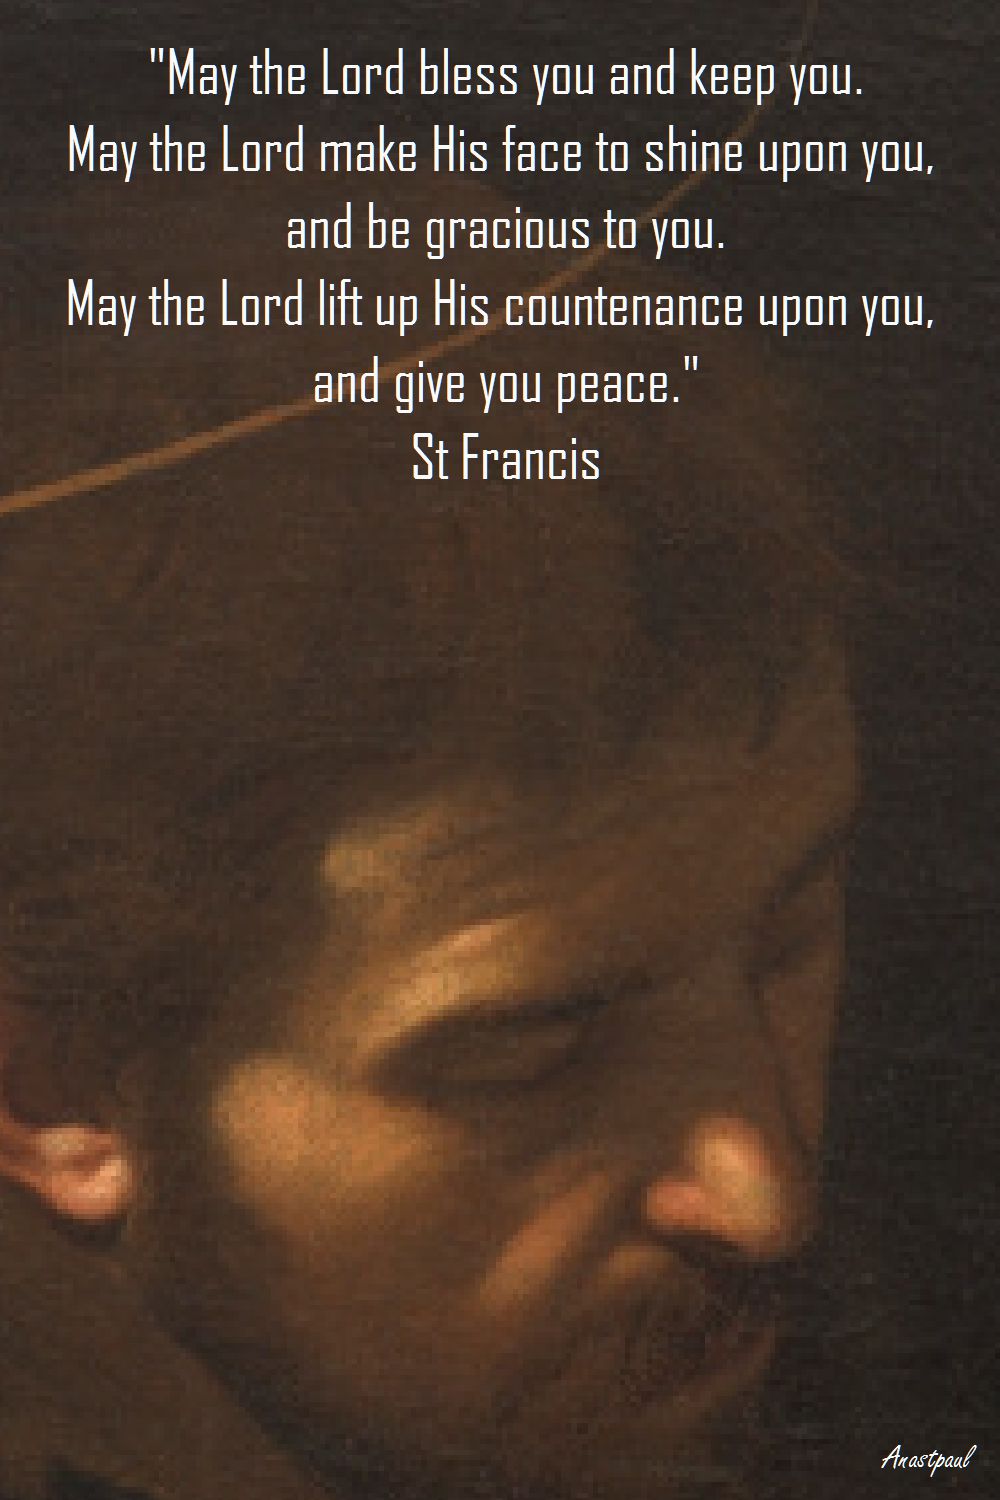 ST FRANCIS PRAYER - MAY THE LORD BLESS YOU AND KEEP YOU